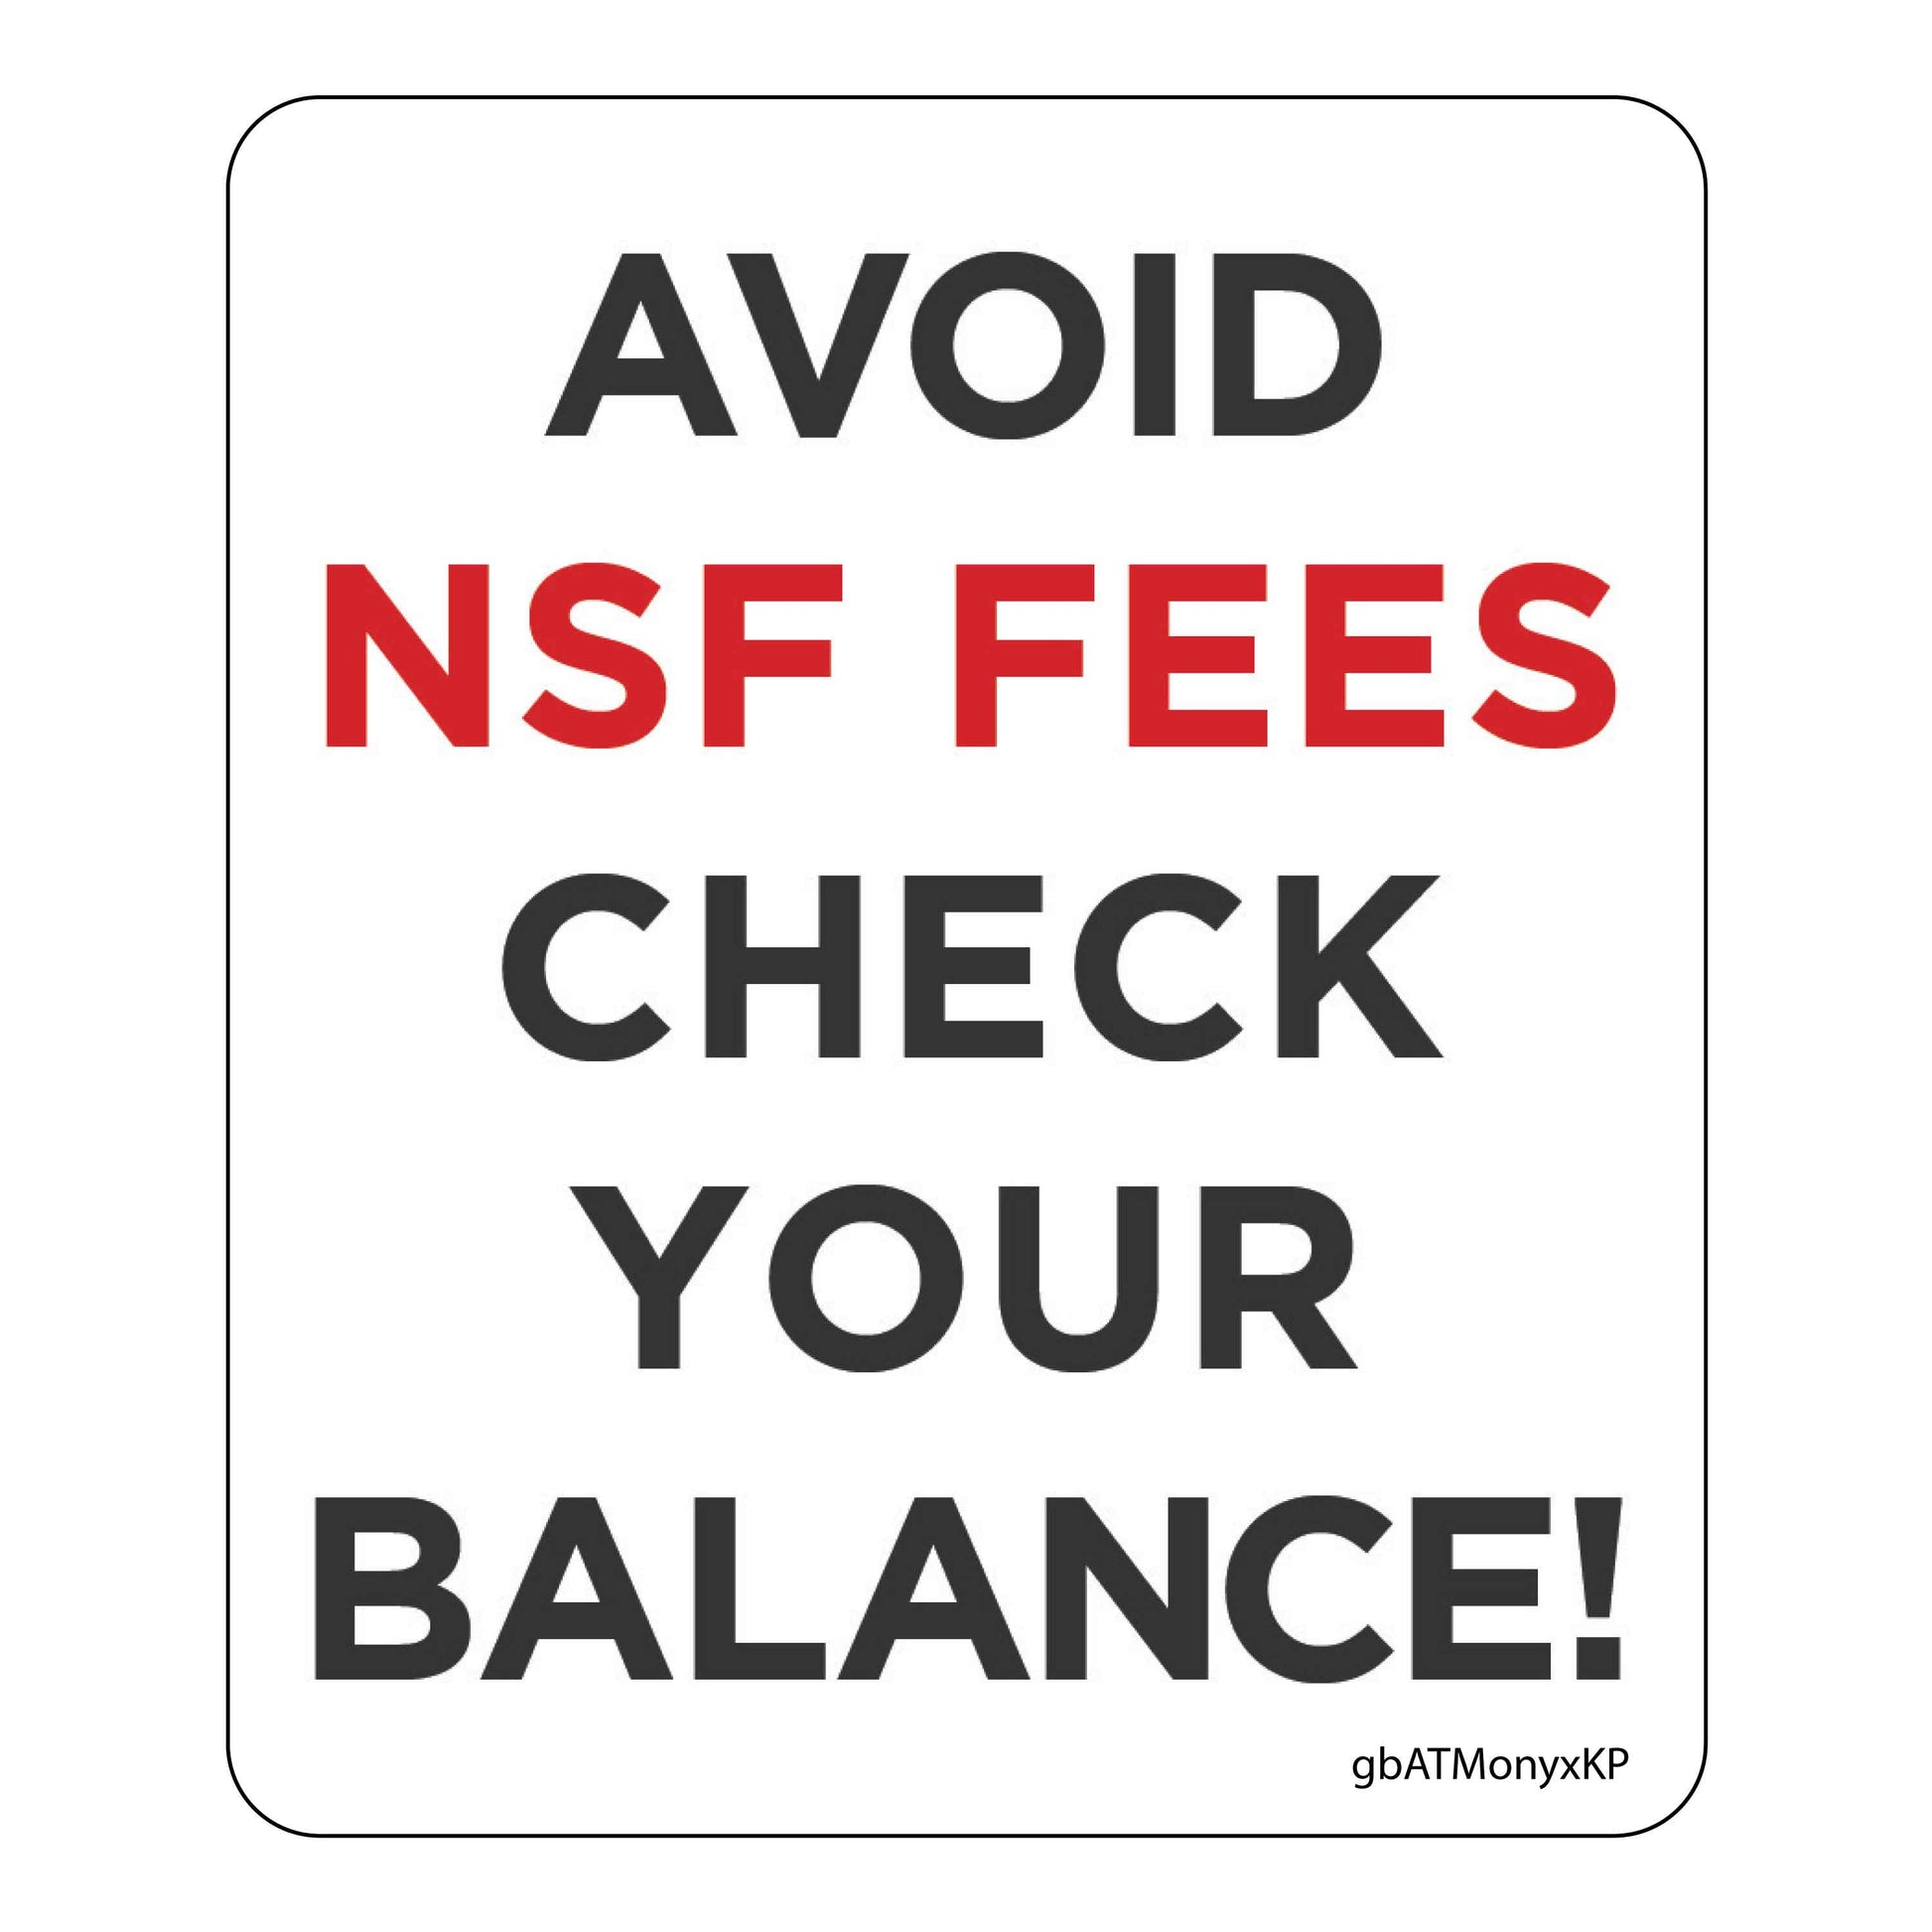 Avoid NSF Fees, Check Your Balance Decal.